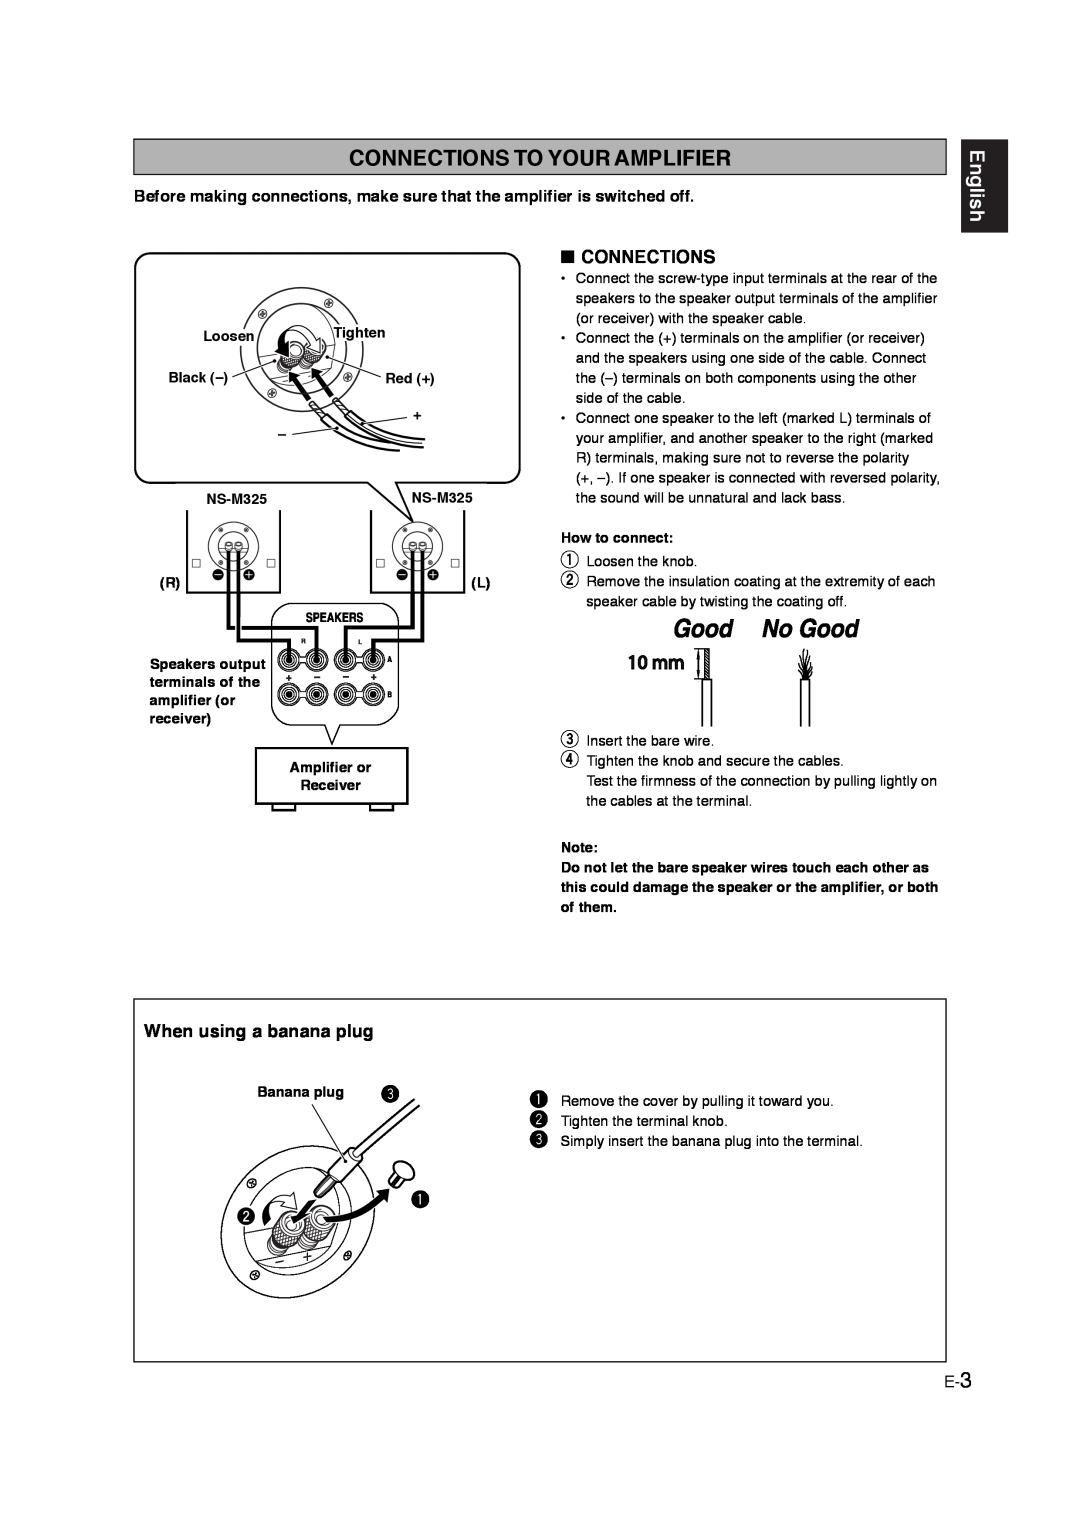 Yamaha NS M325 owner manual Connections To Your Amplifier, English, When using a banana plug 